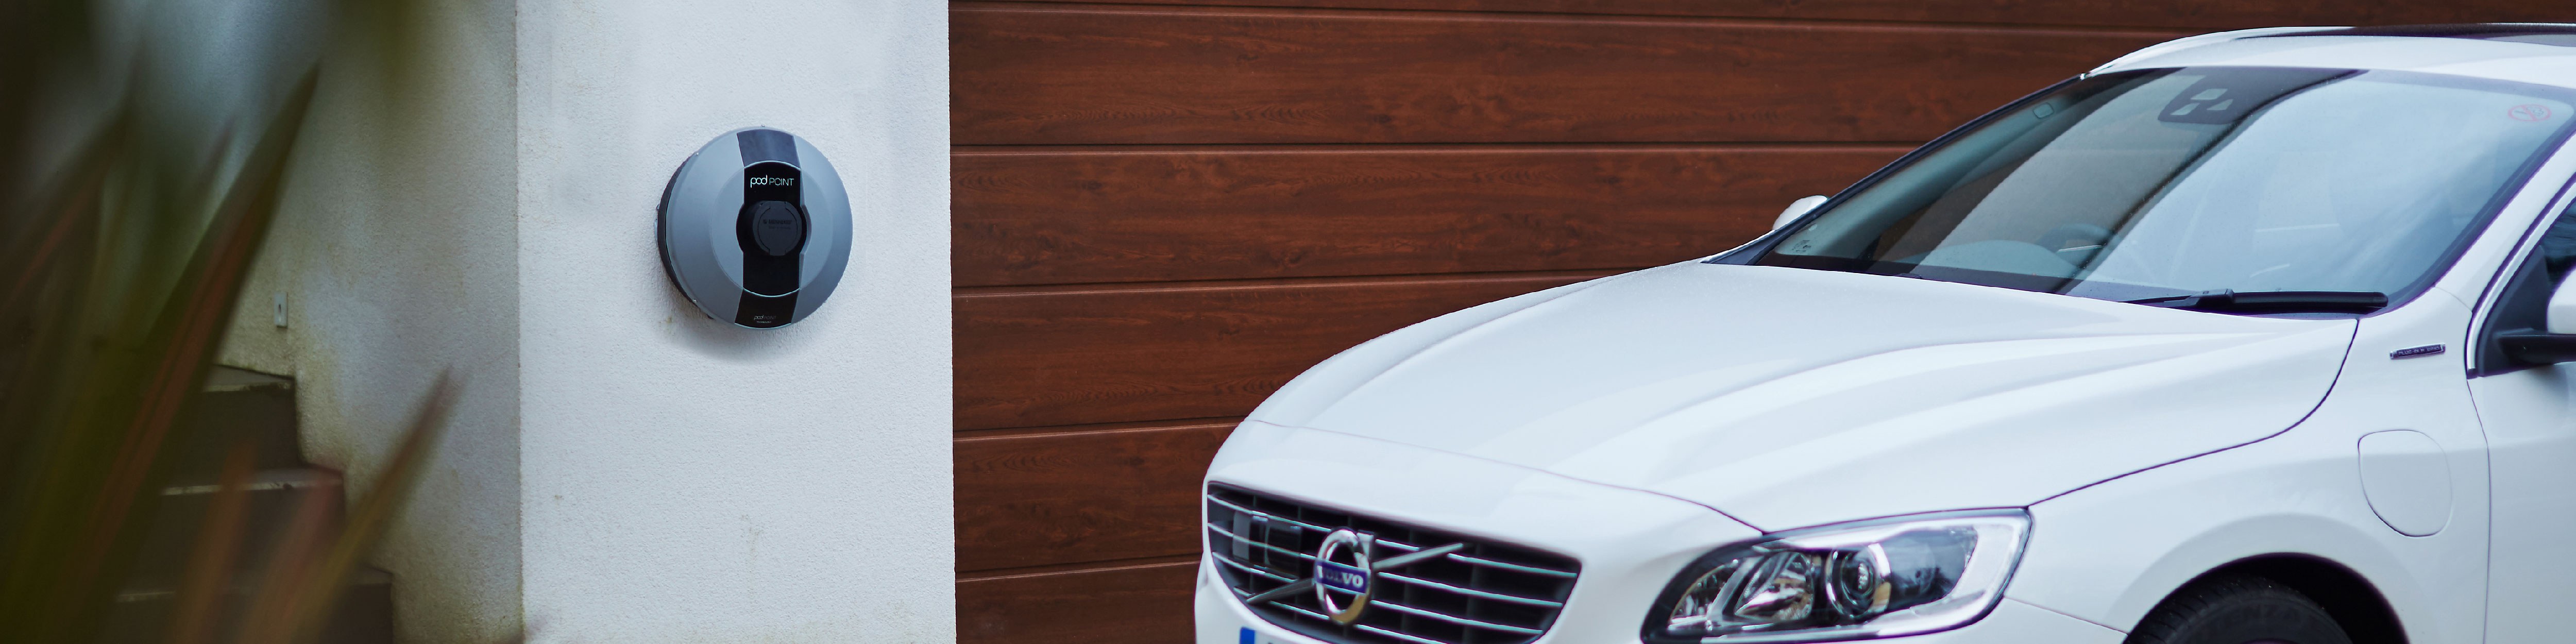 Preferred Supplier for Volvo Charging Stations in the UK